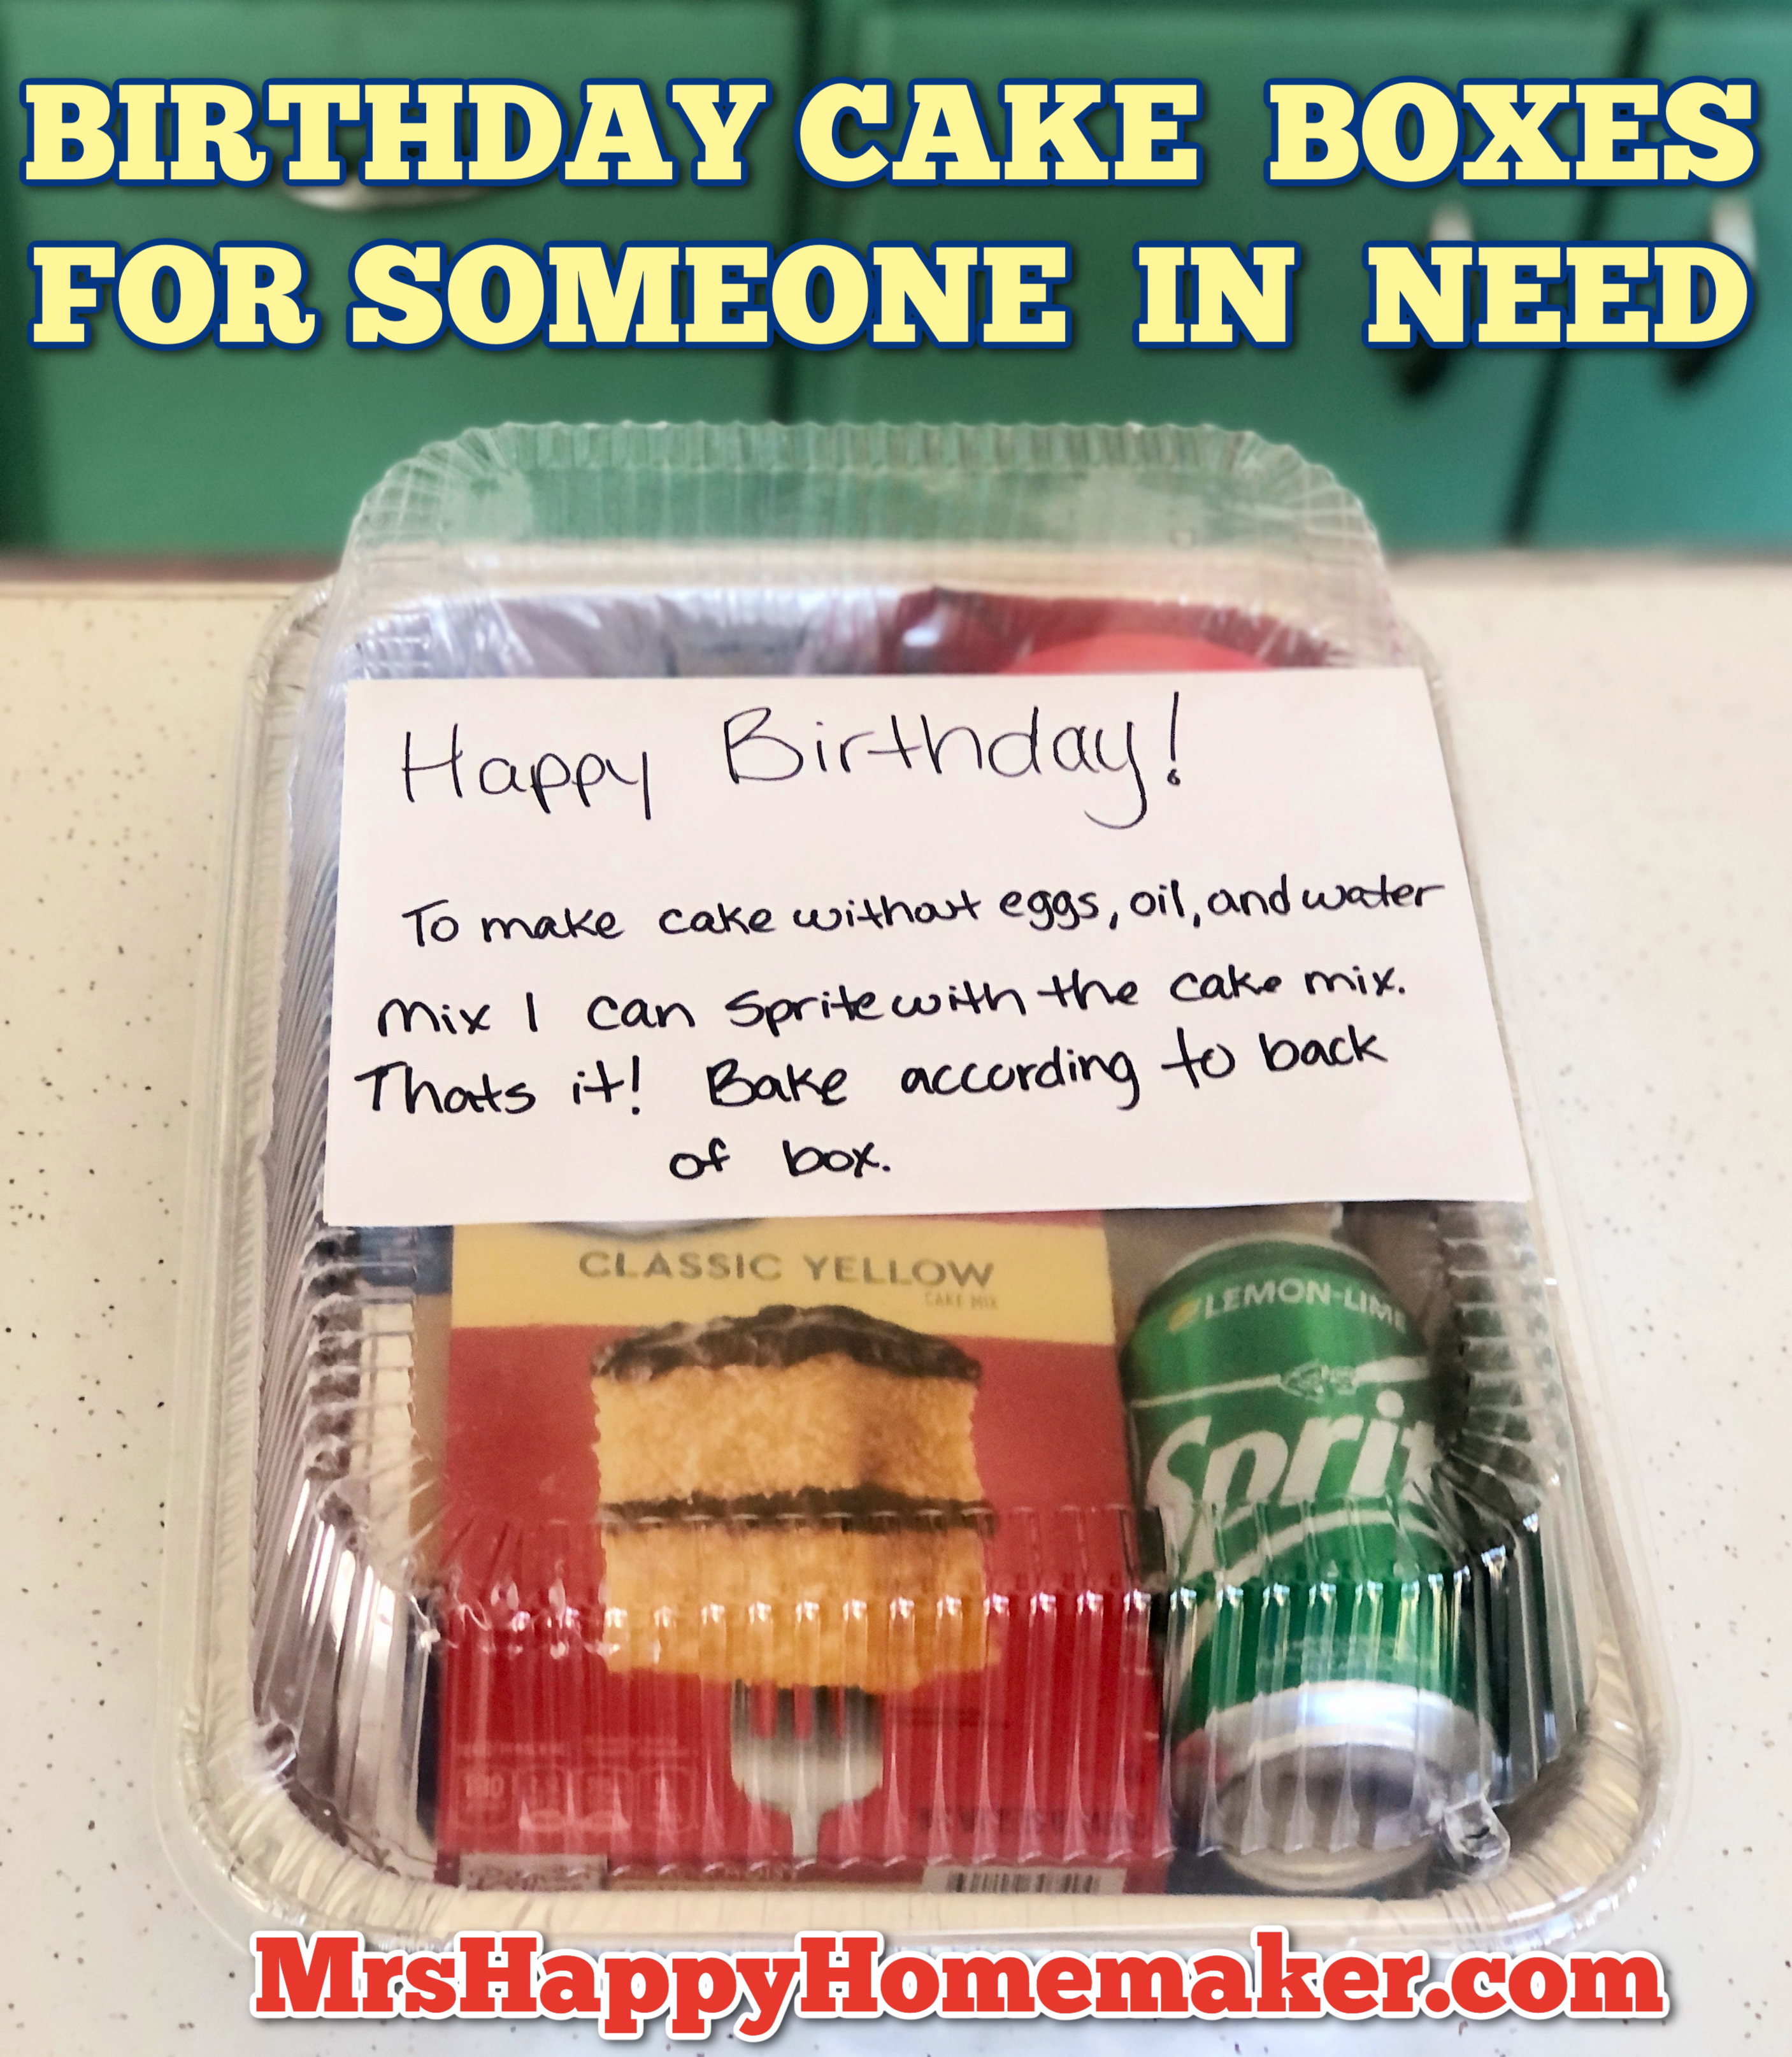 Birthday Cake Boxes for People in Need